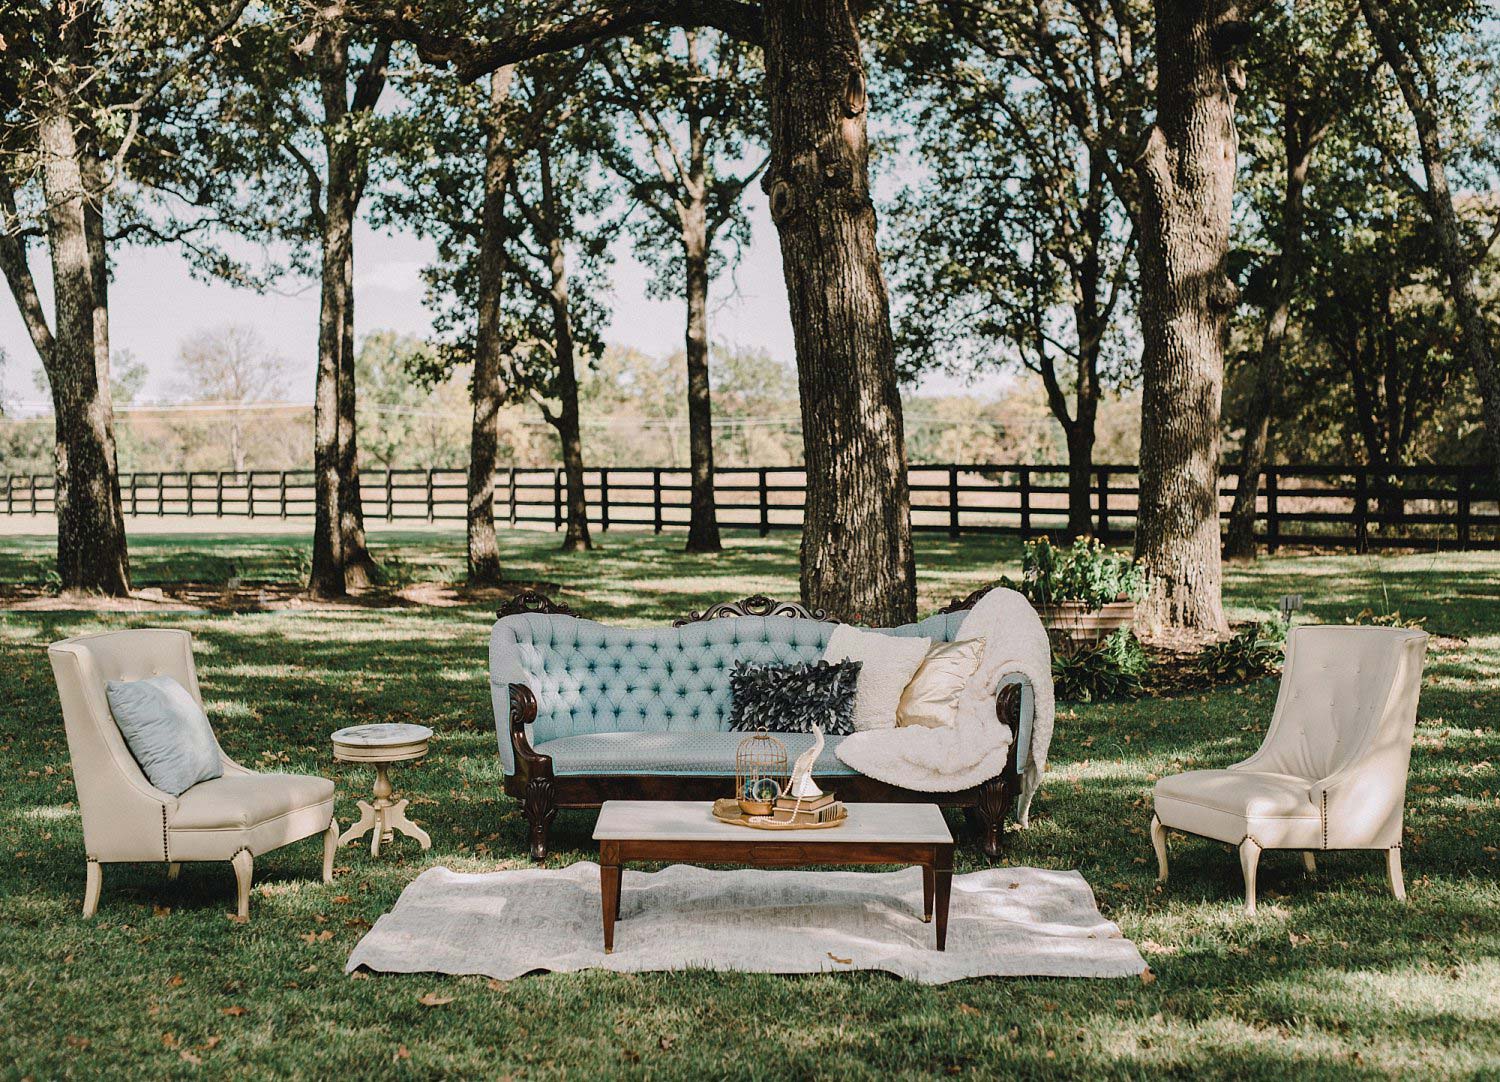 This outdoor blue and white wedding lounge at White Sparrow Barn was perfect for this barn wedding.